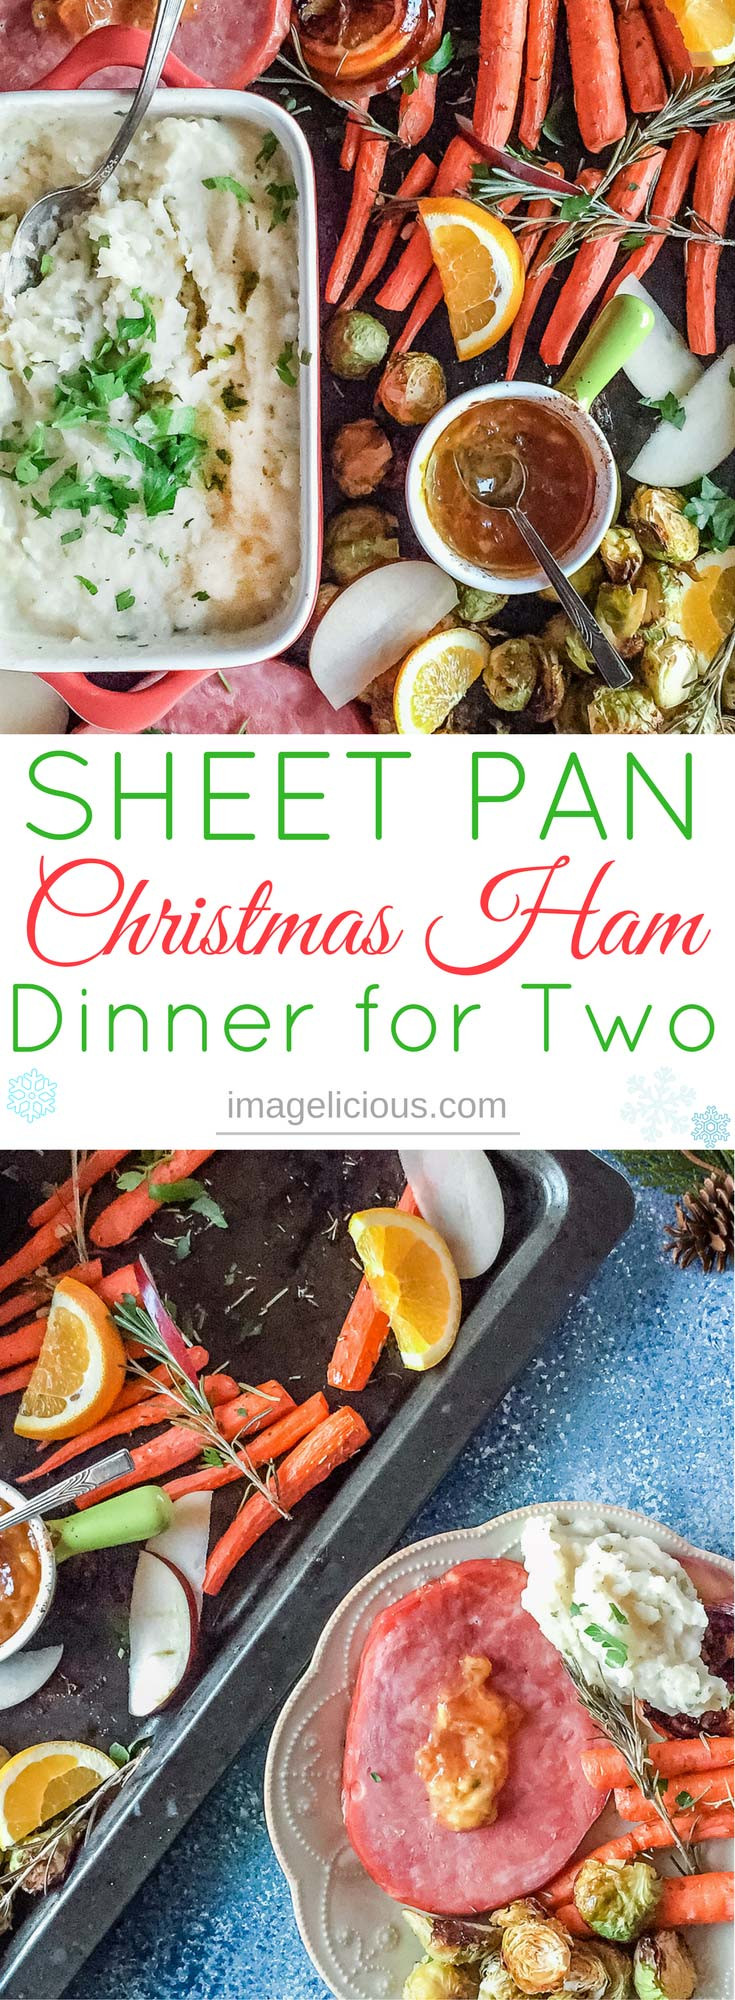 Easy Christmas Dinners For Two
 Sheet Pan Christmas Ham Dinner For Two Imagelicious